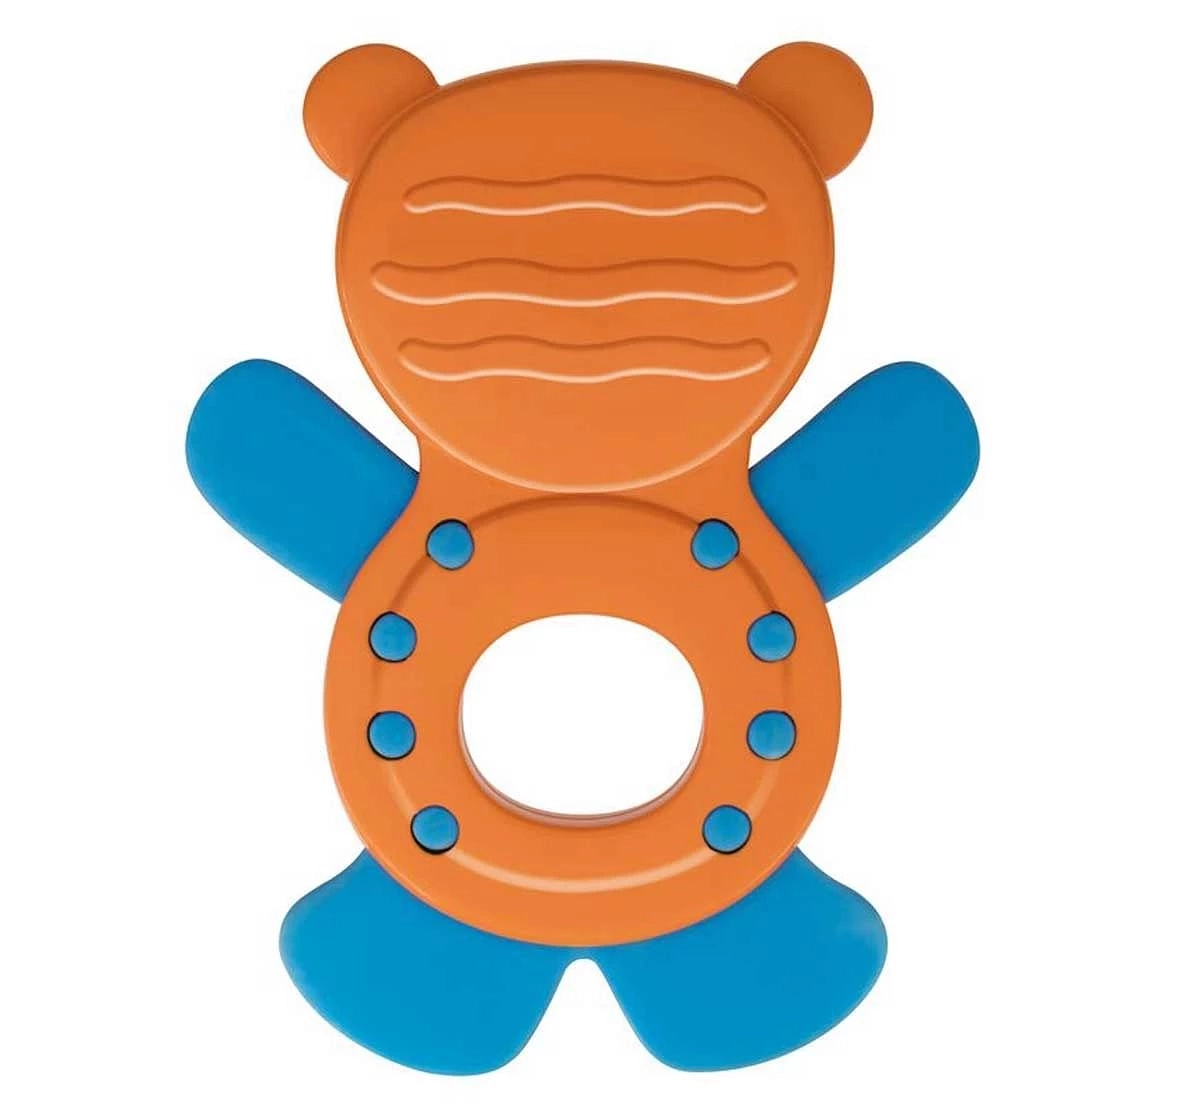 Chicco Ben the Bear Rattle for Kids 3M+, Multicolour